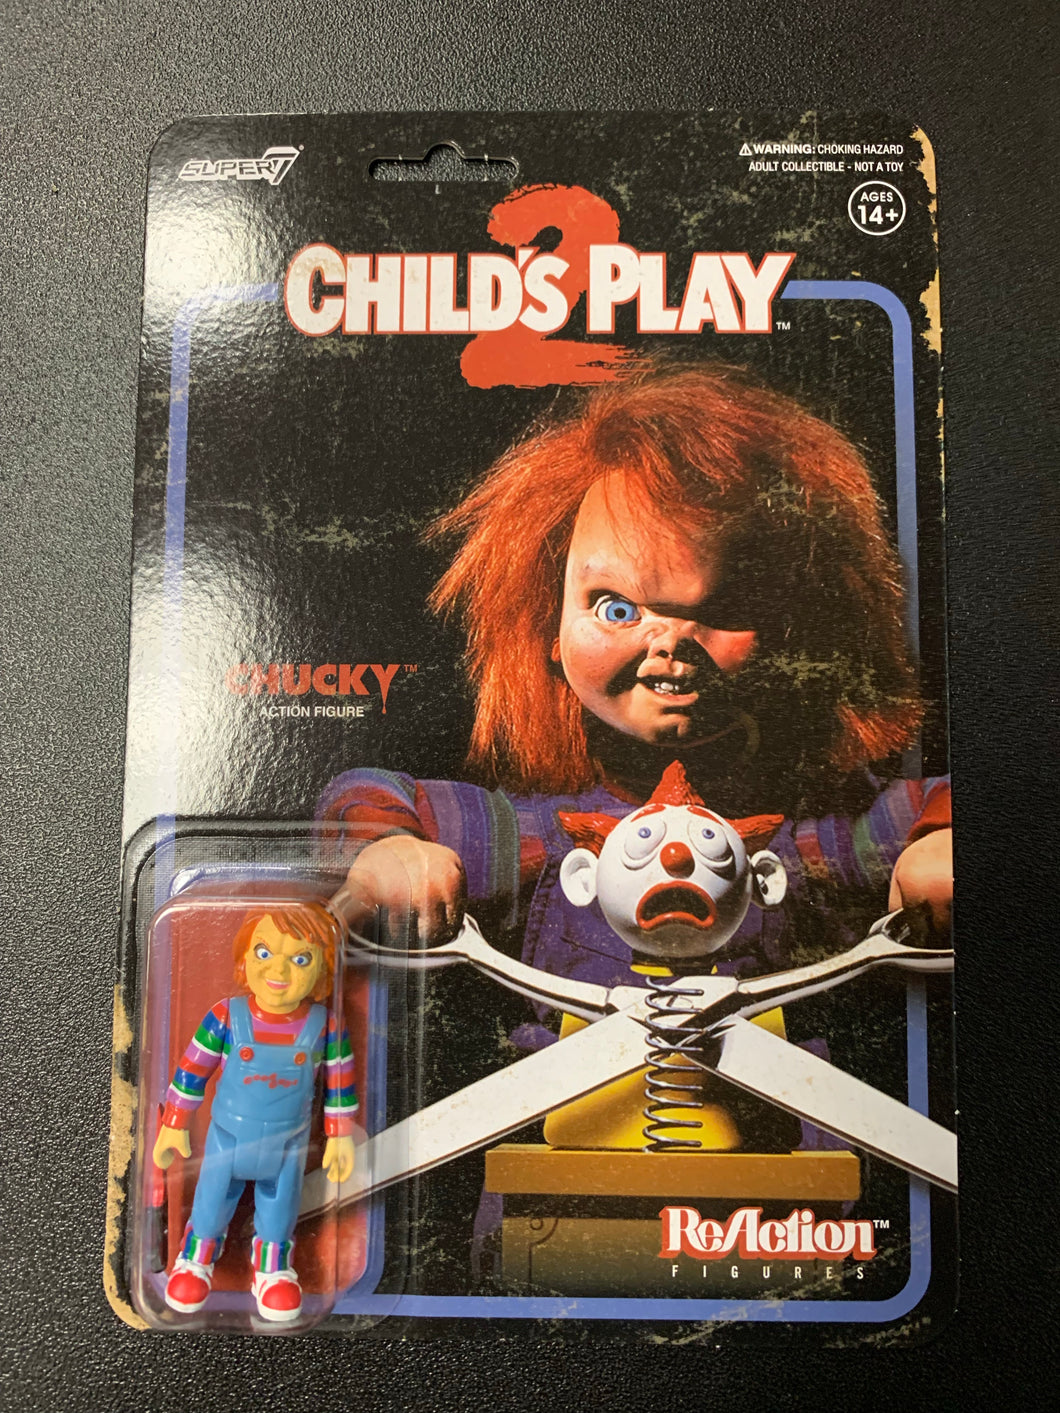 REACTION FIGURES SUPER7 CHILD’S PLAY 2 CHUCKY